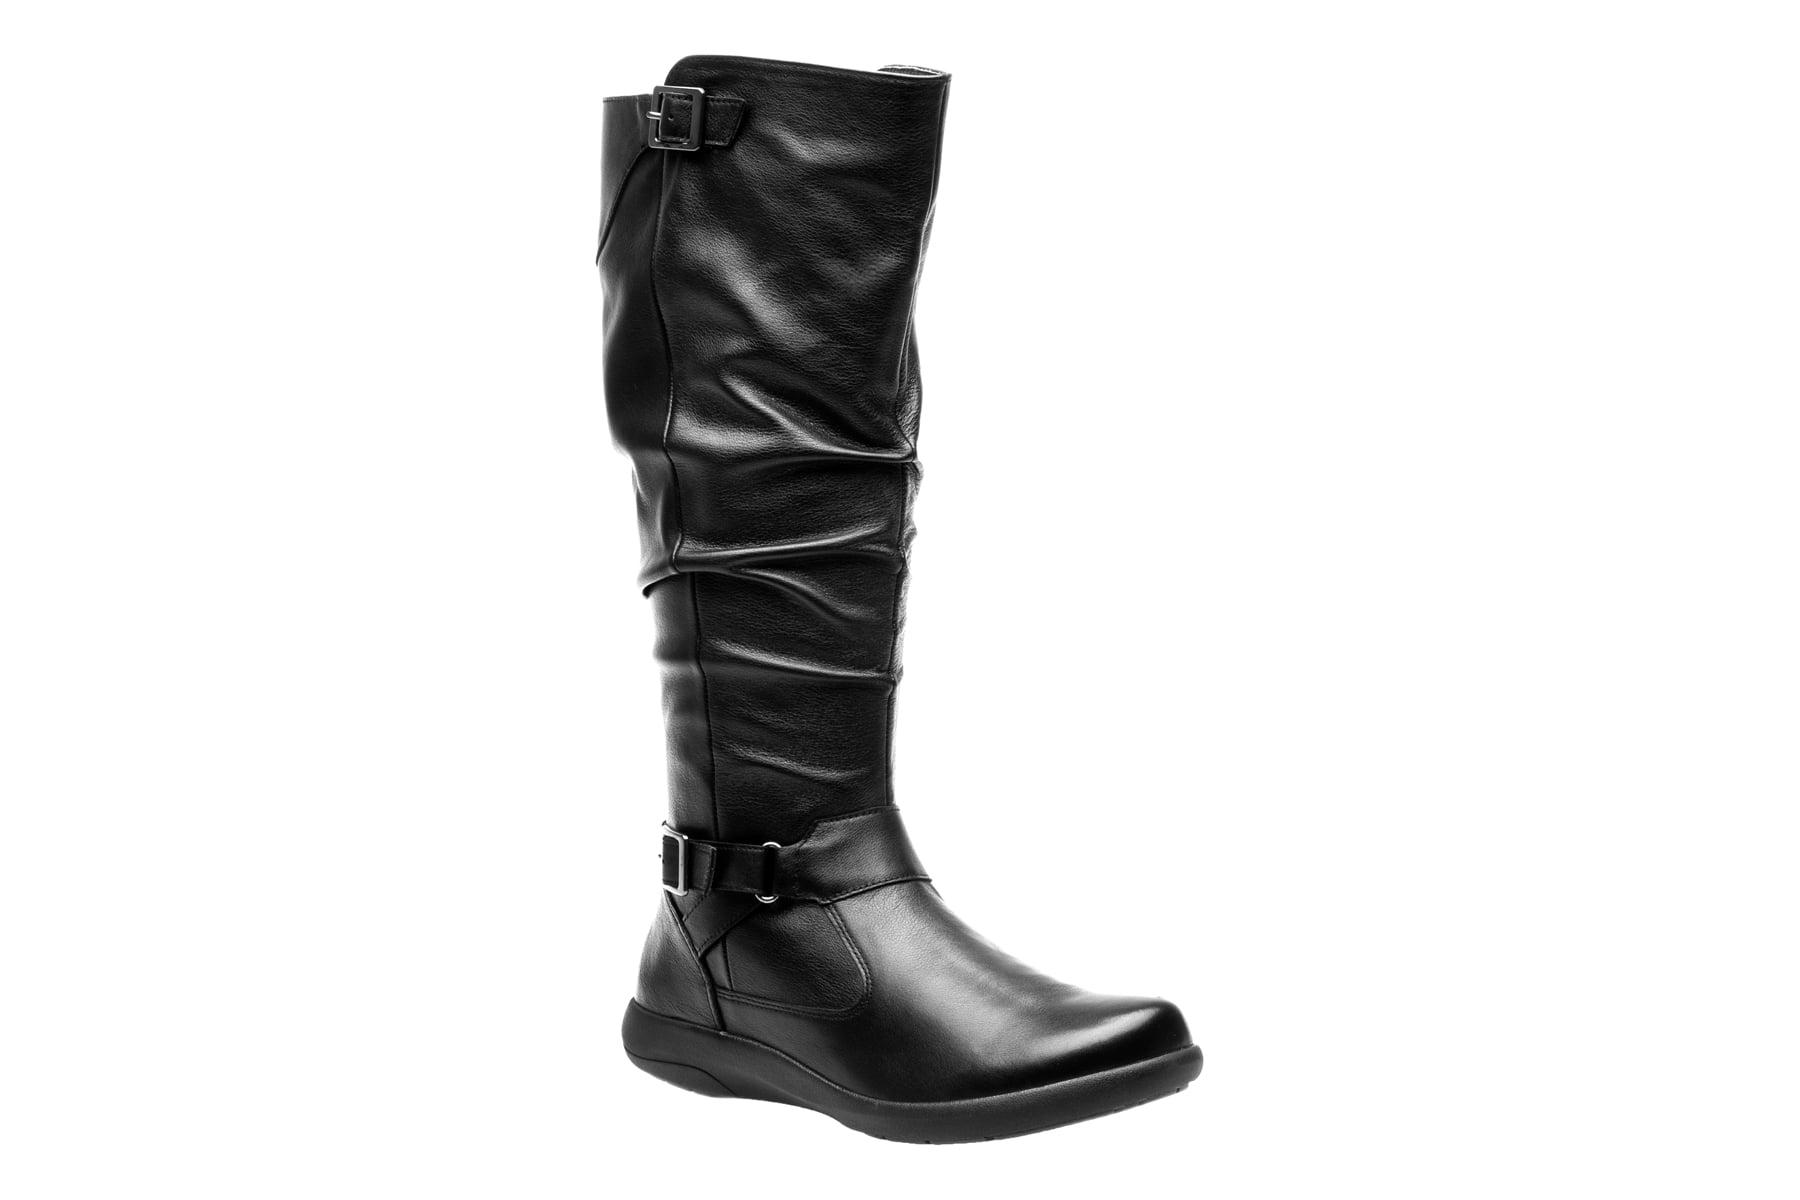 abeo boots